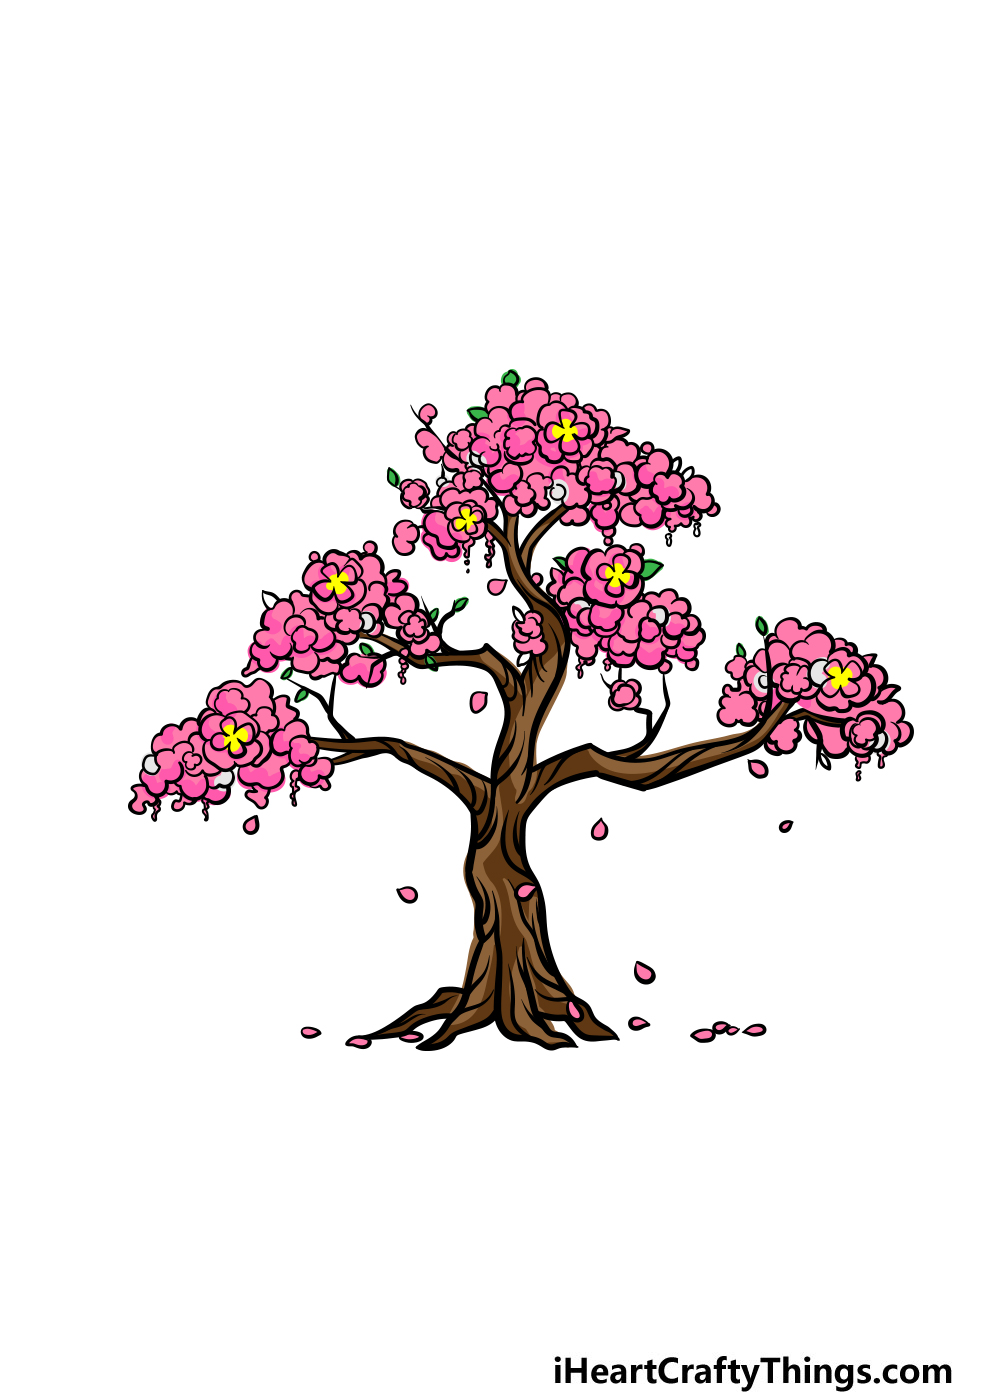 Cherry Blossom Tree Drawing - How To Draw A Cherry Blossom Tree ...